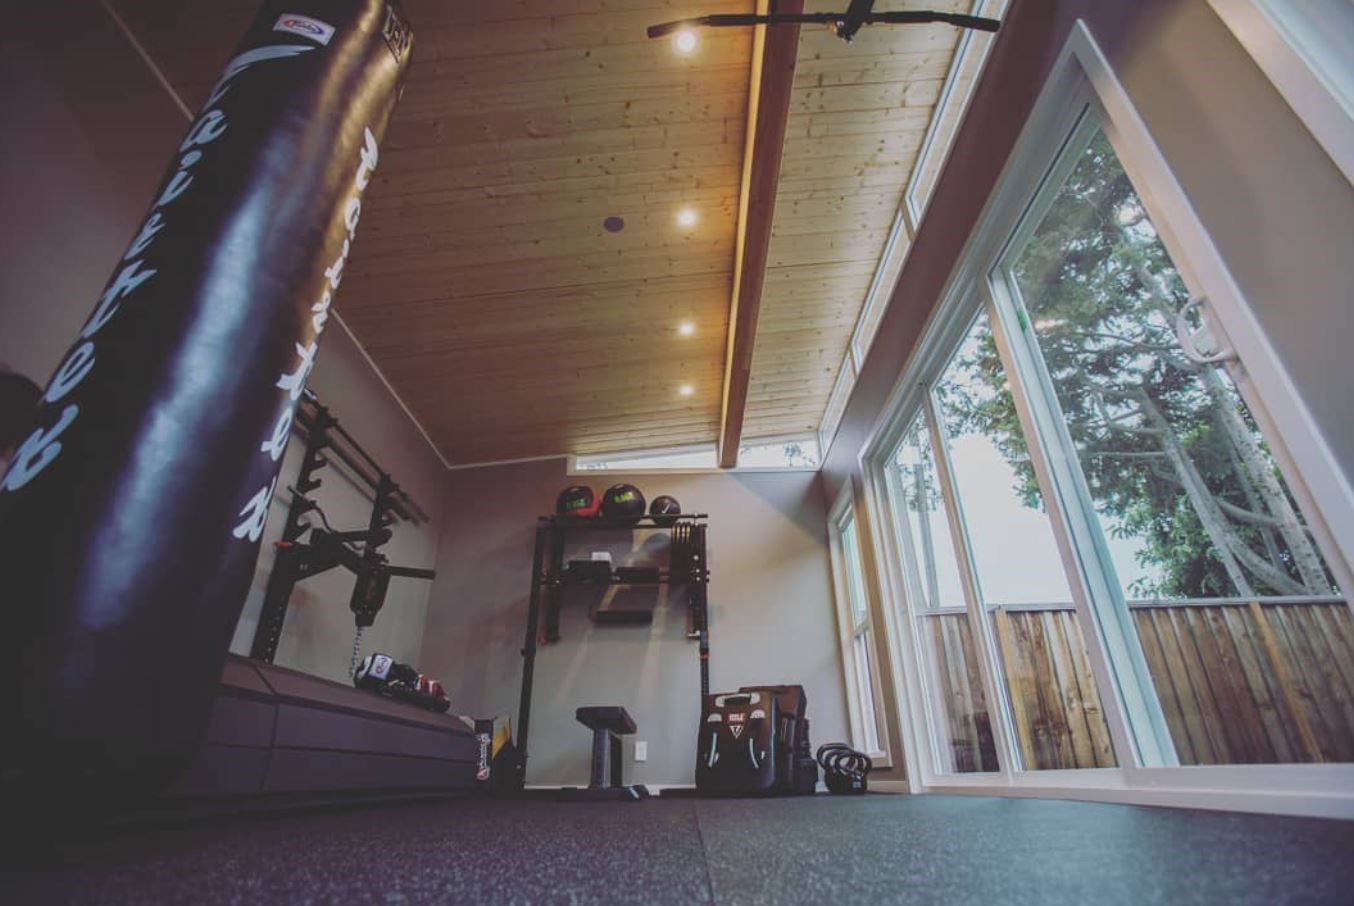 Workout room in a home